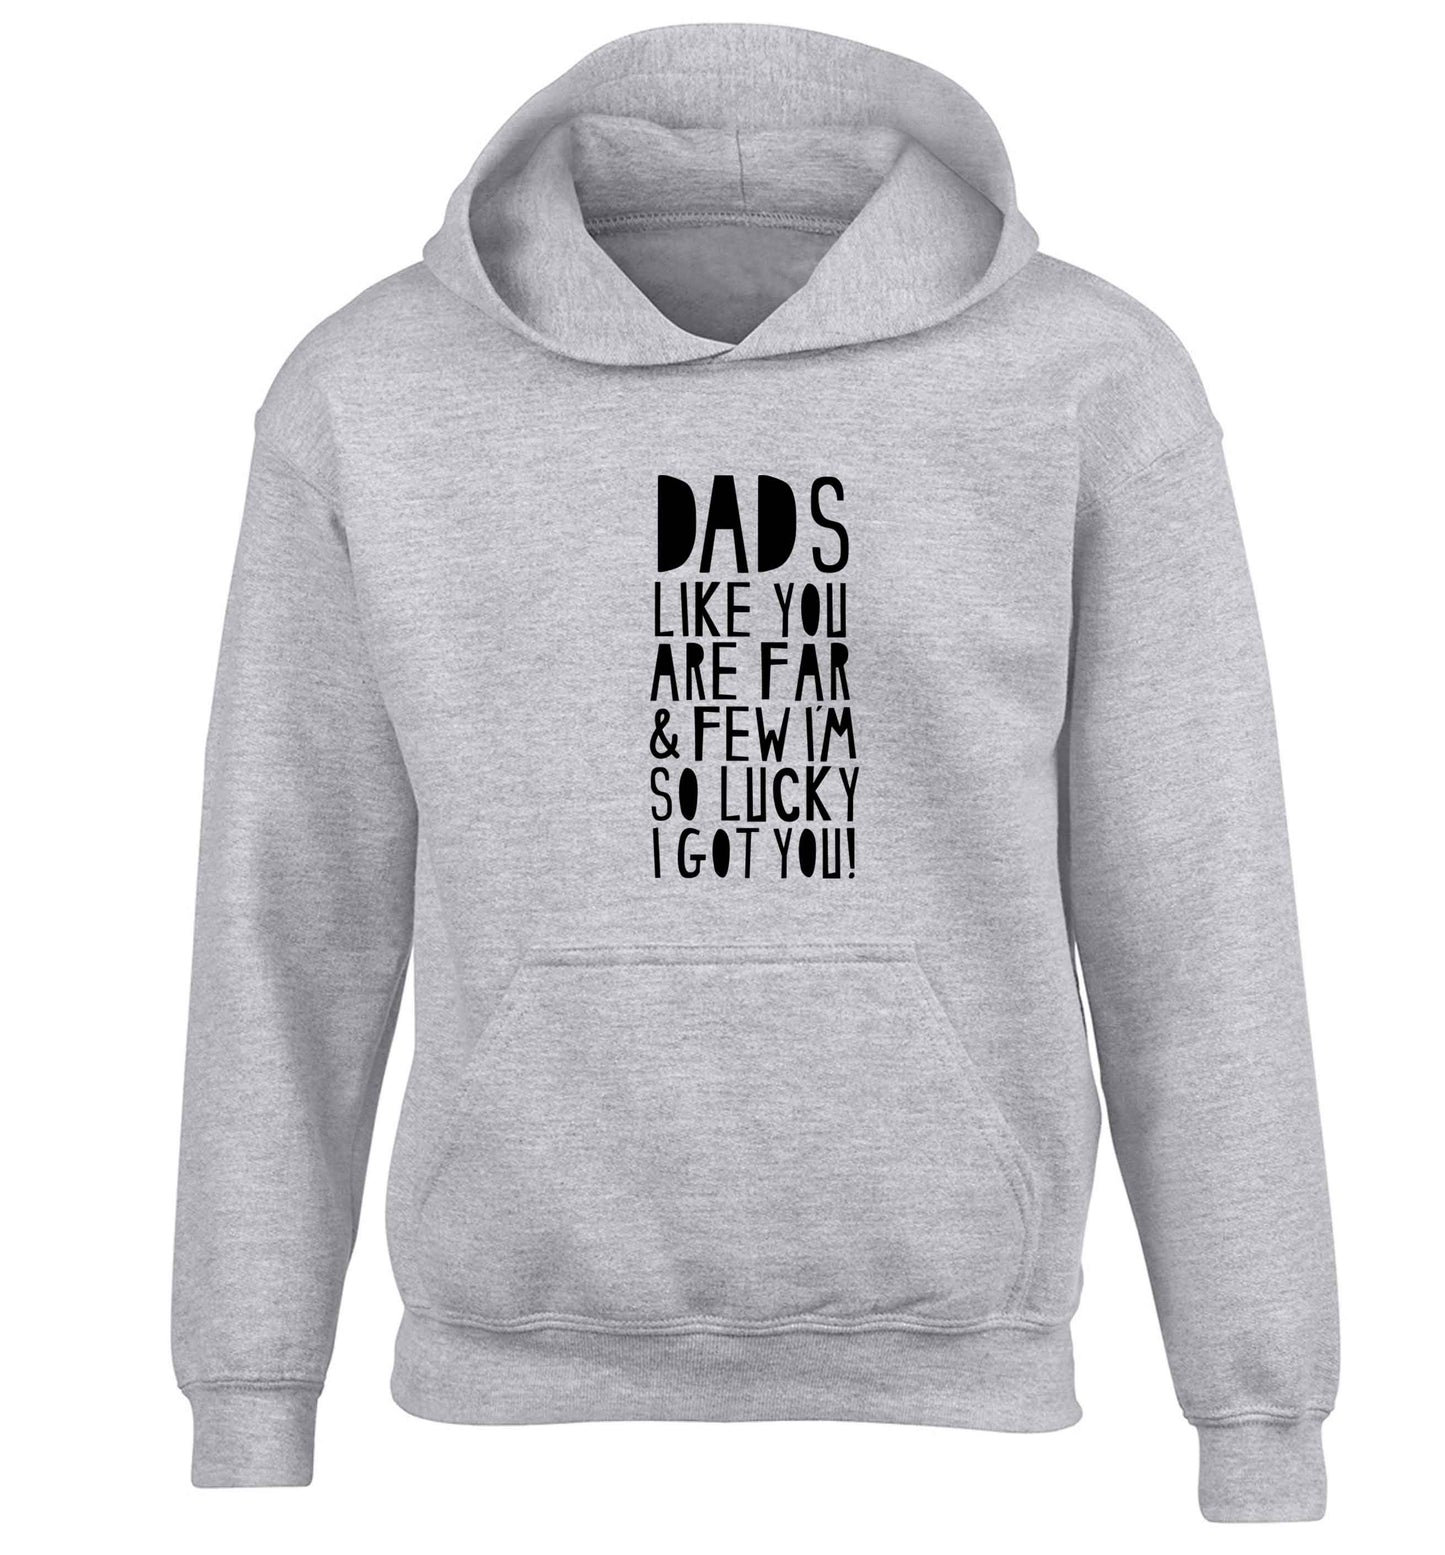 Dads like you are far and few I'm so luck I got you! children's grey hoodie 12-13 Years